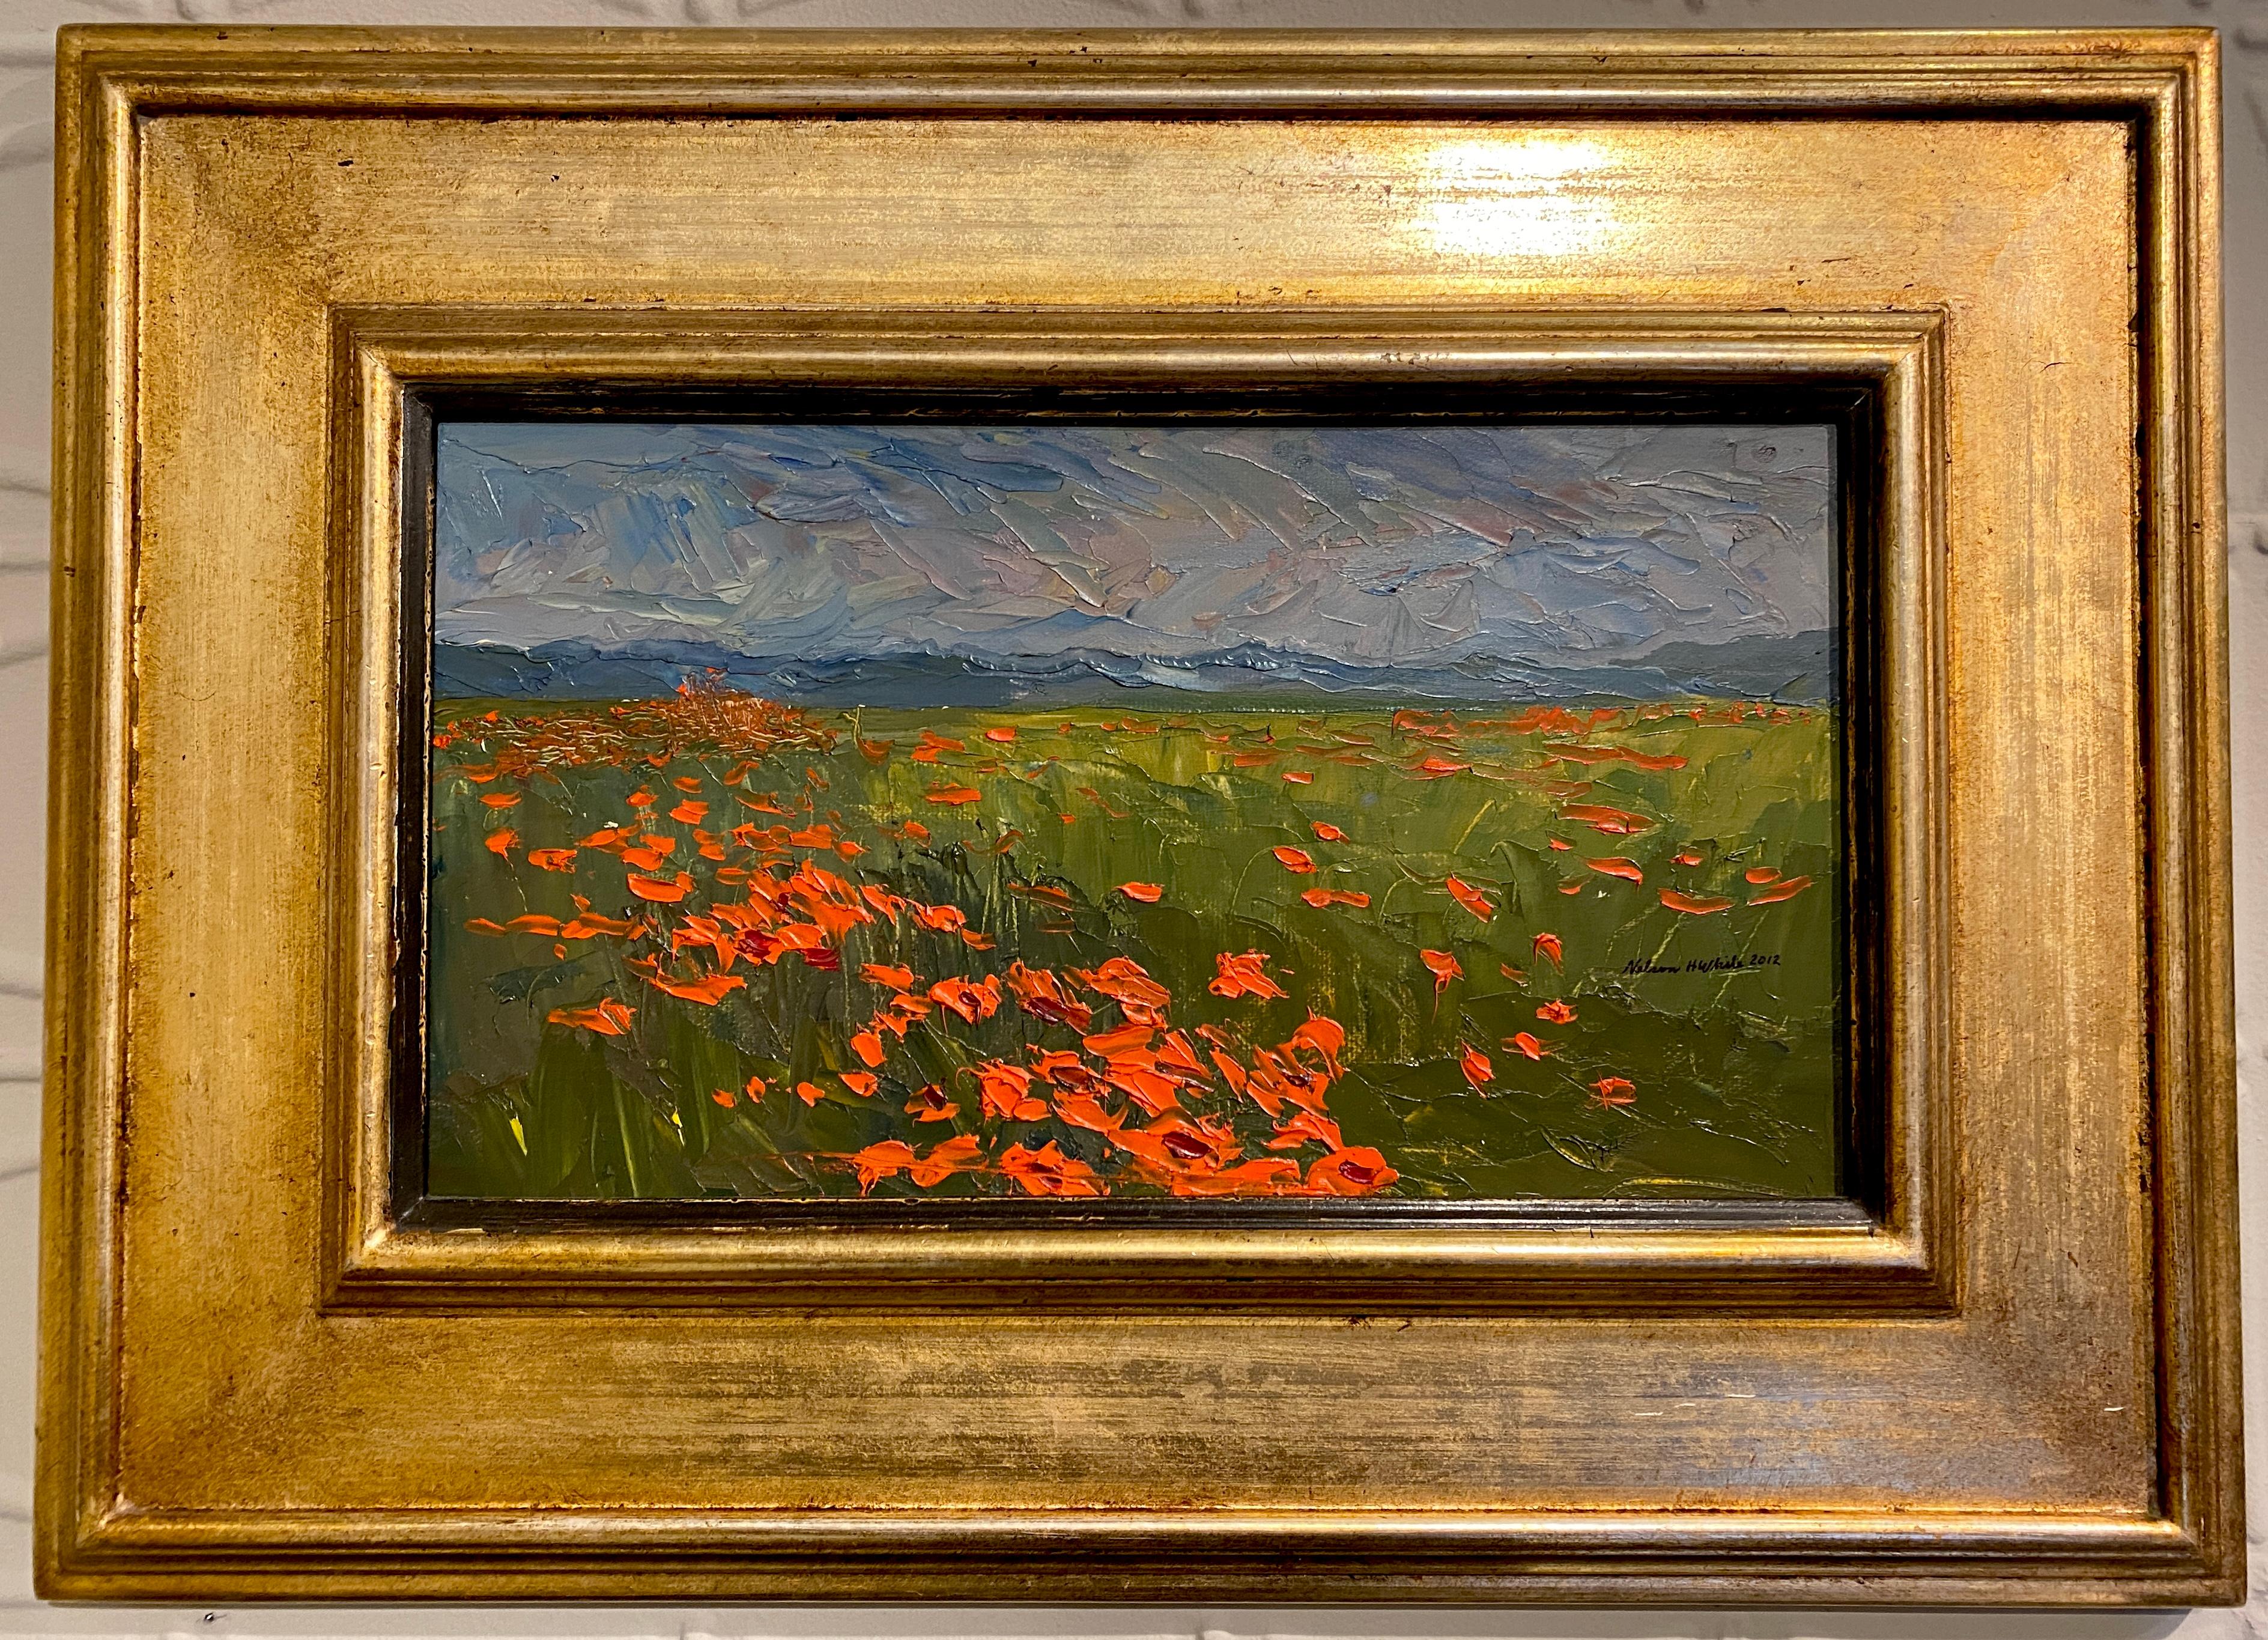 The Poppy Field at Torre del Lago - 05.26.2012 - Painting by Nelson H. White